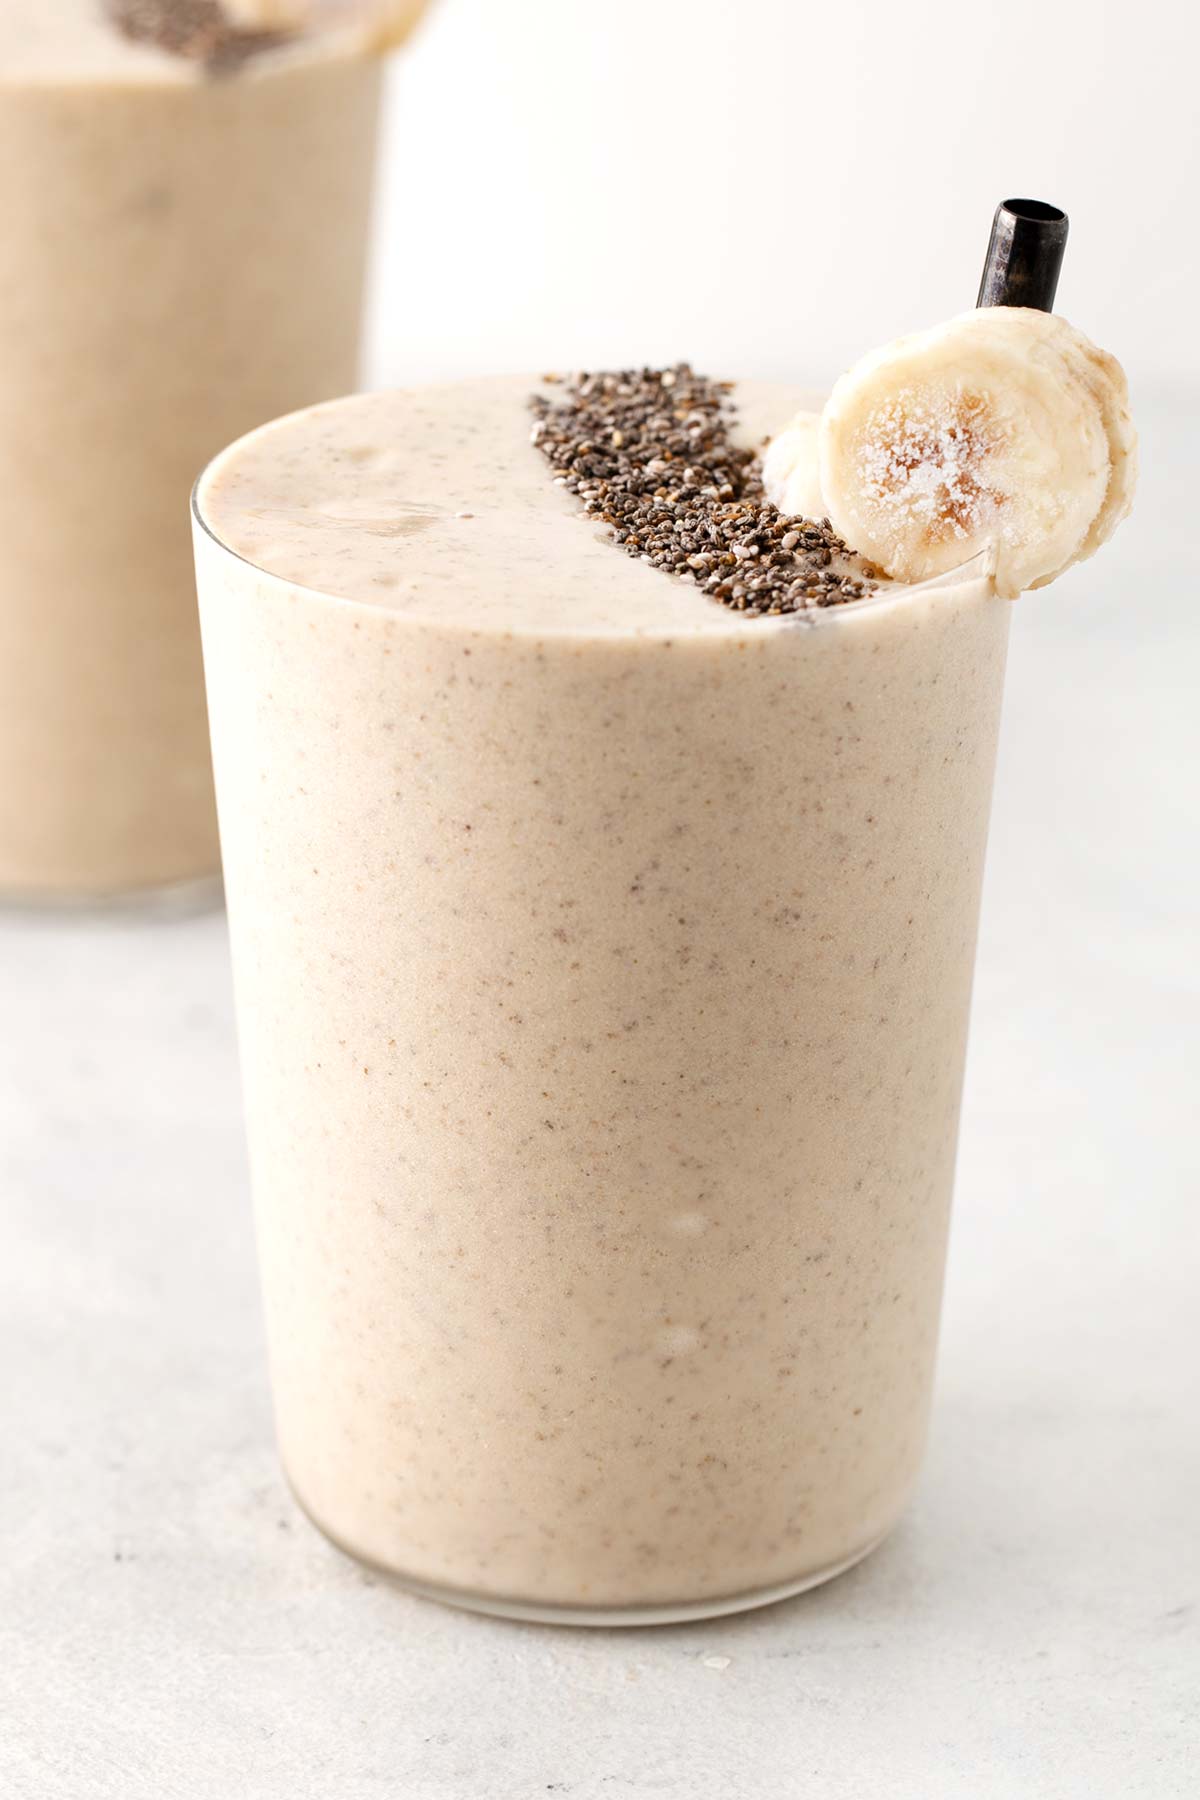 Banana protein smoothie in a glass.